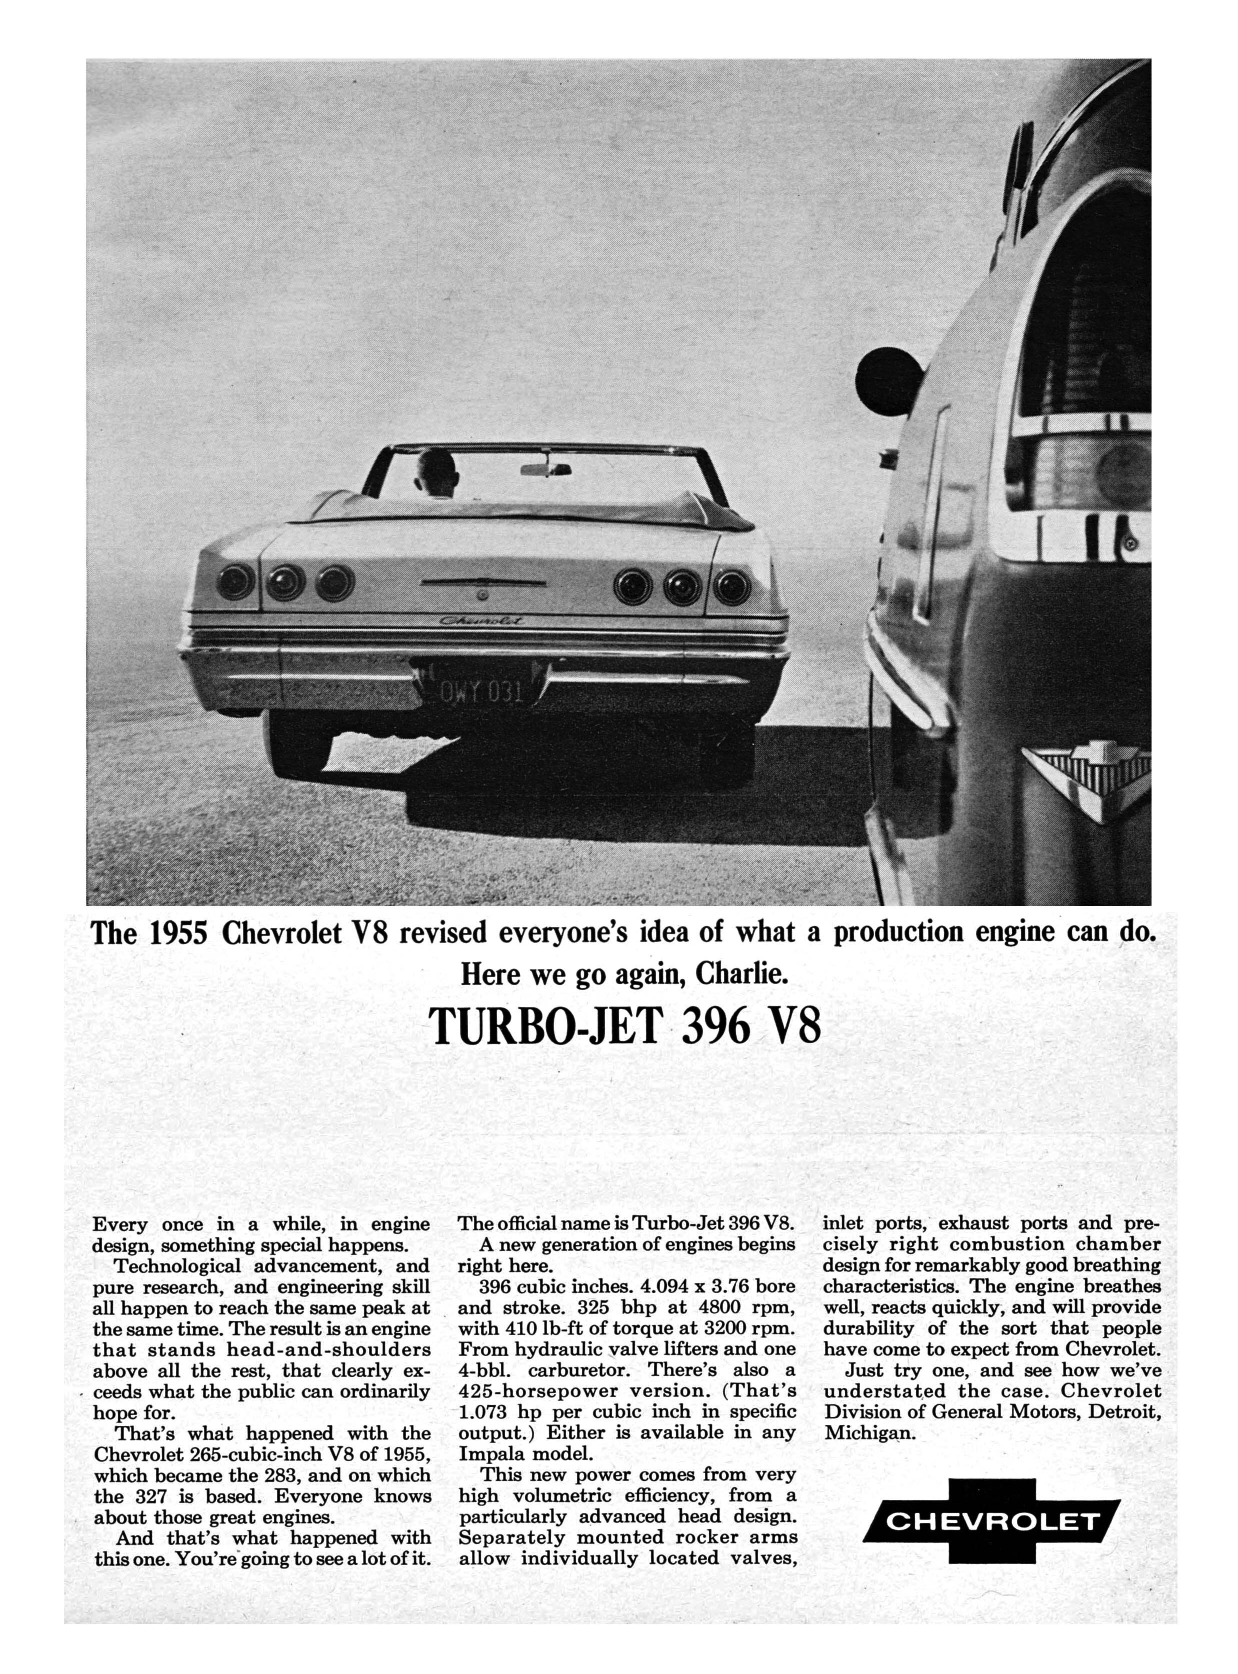 1965 Chevrolet Ad, Impala Sport Coupe "Here we go again Charlie"